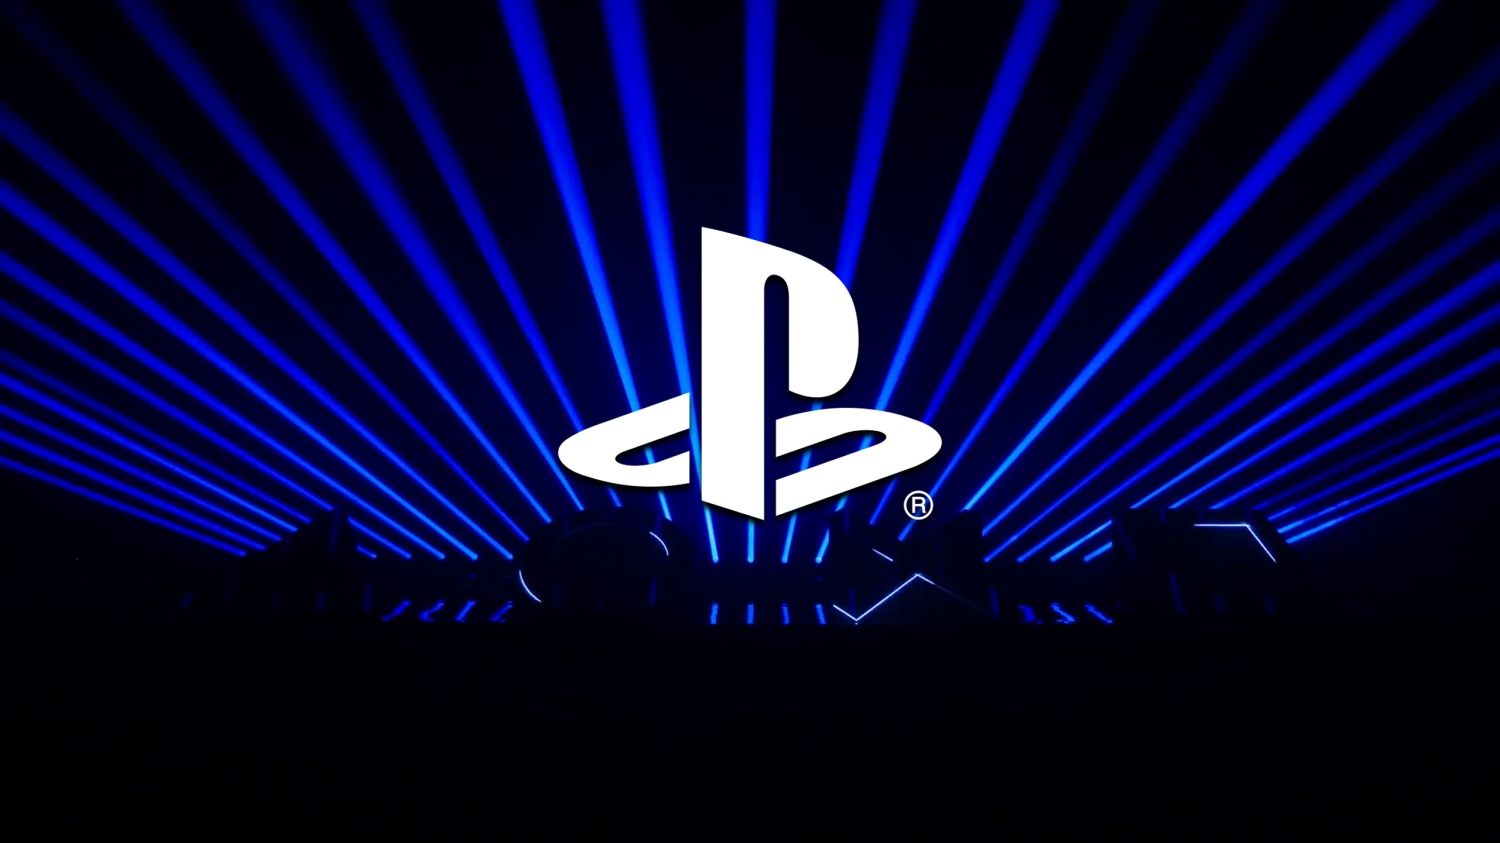 PlayStation E3 summer show debuts May 24, will show off PS5 games and new IP